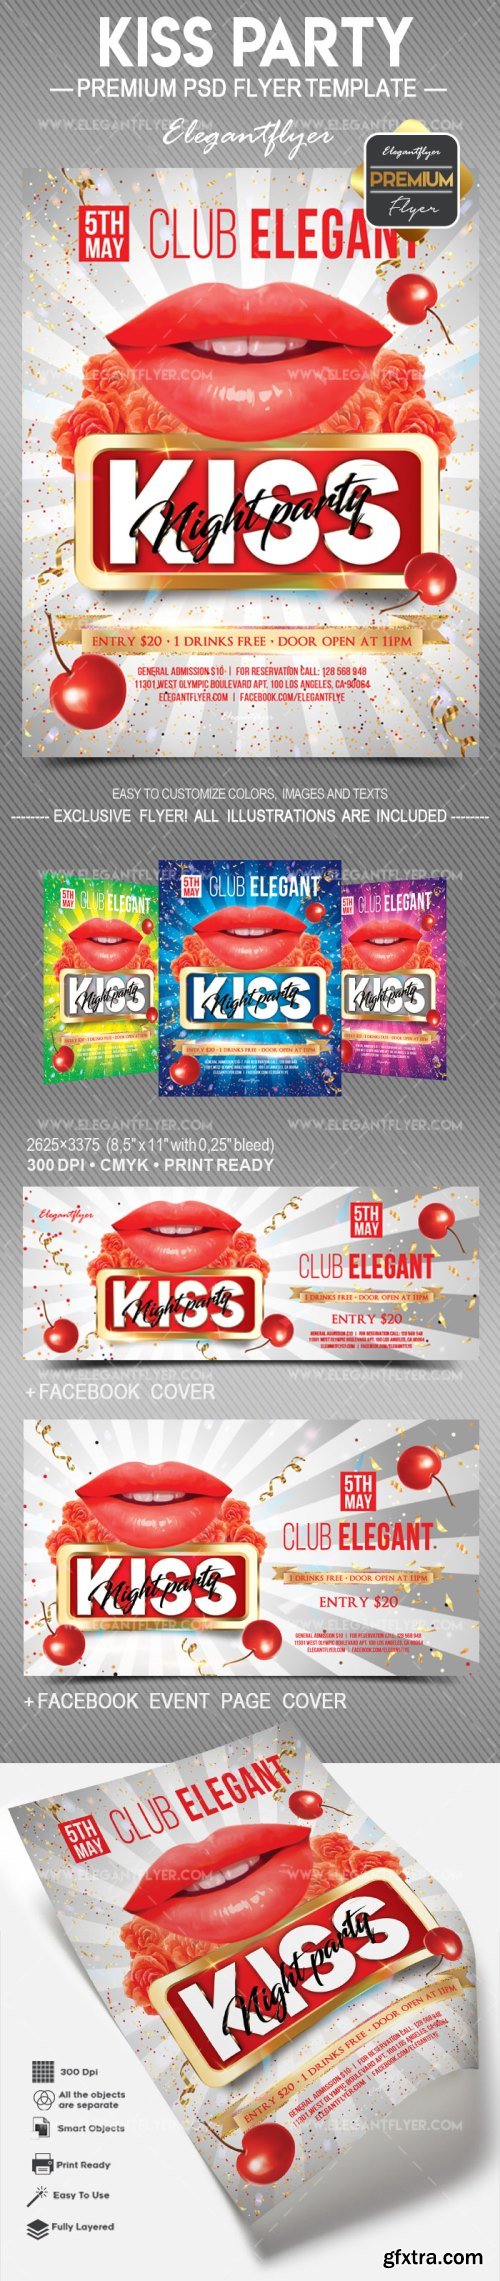 Kiss Party Club Flyers Template